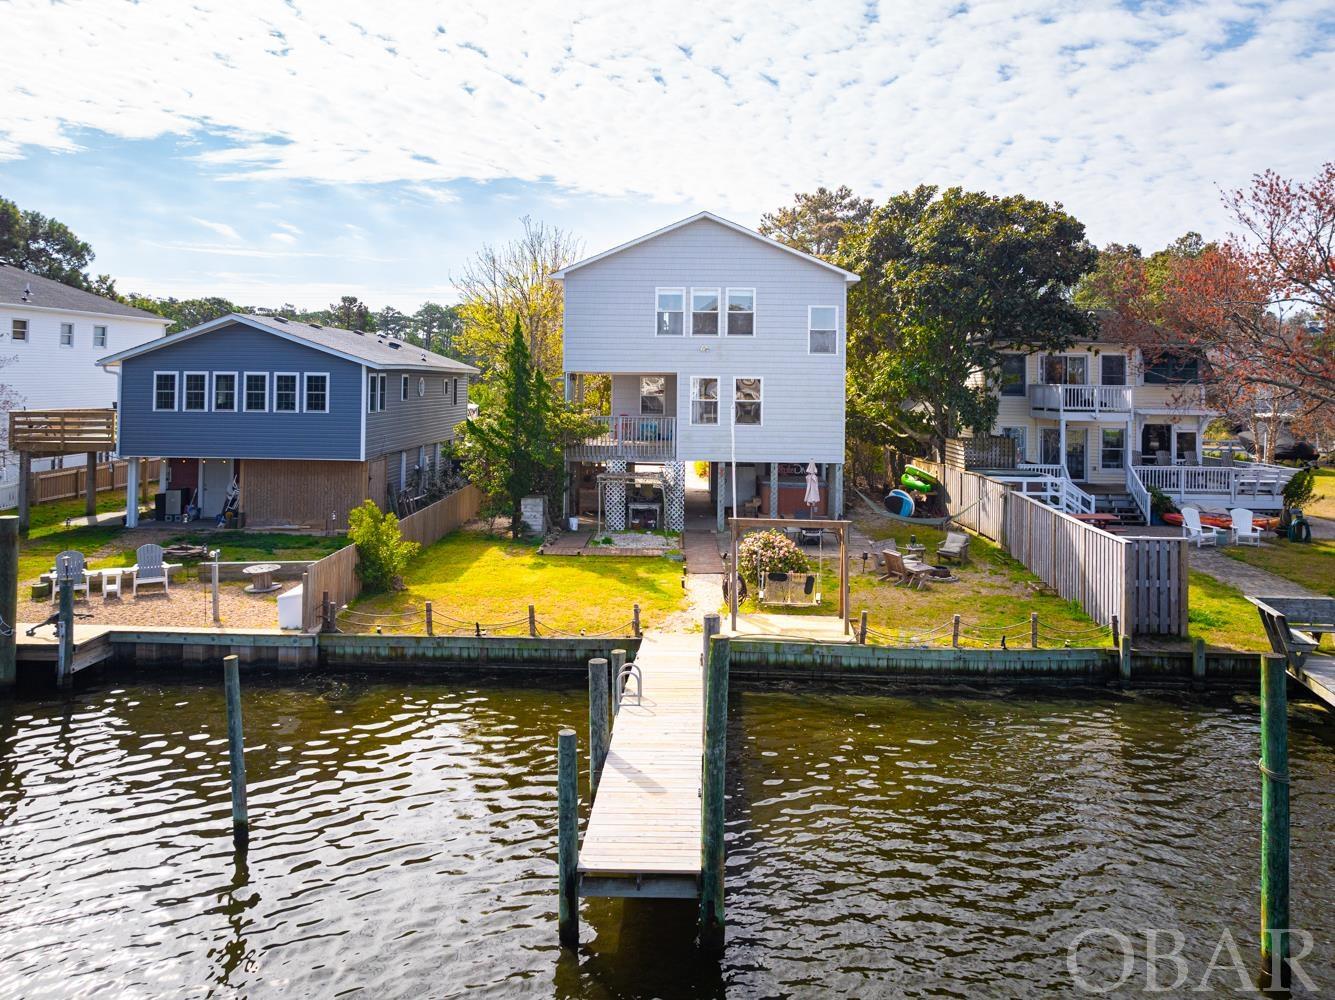 470 Harbour View Drive, Kill Devil Hills, NC 27948, 3 Bedrooms Bedrooms, ,2 BathroomsBathrooms,Residential,For sale,Harbour View Drive,125199